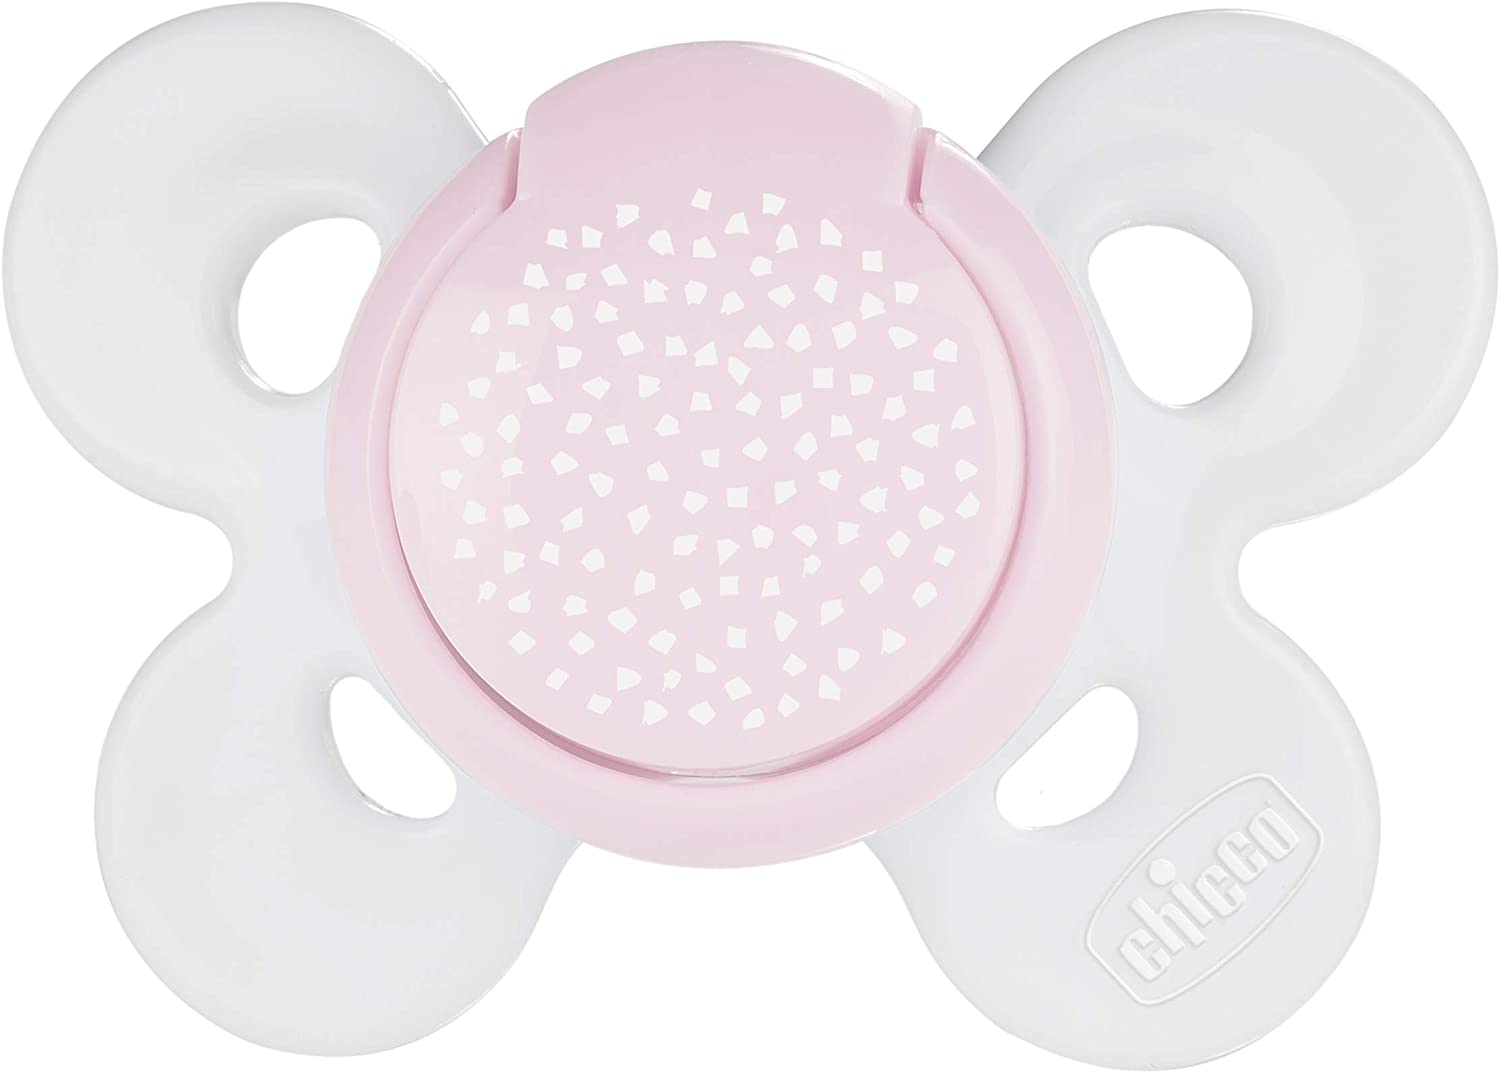 Chicco Physio Soft Pink chupete